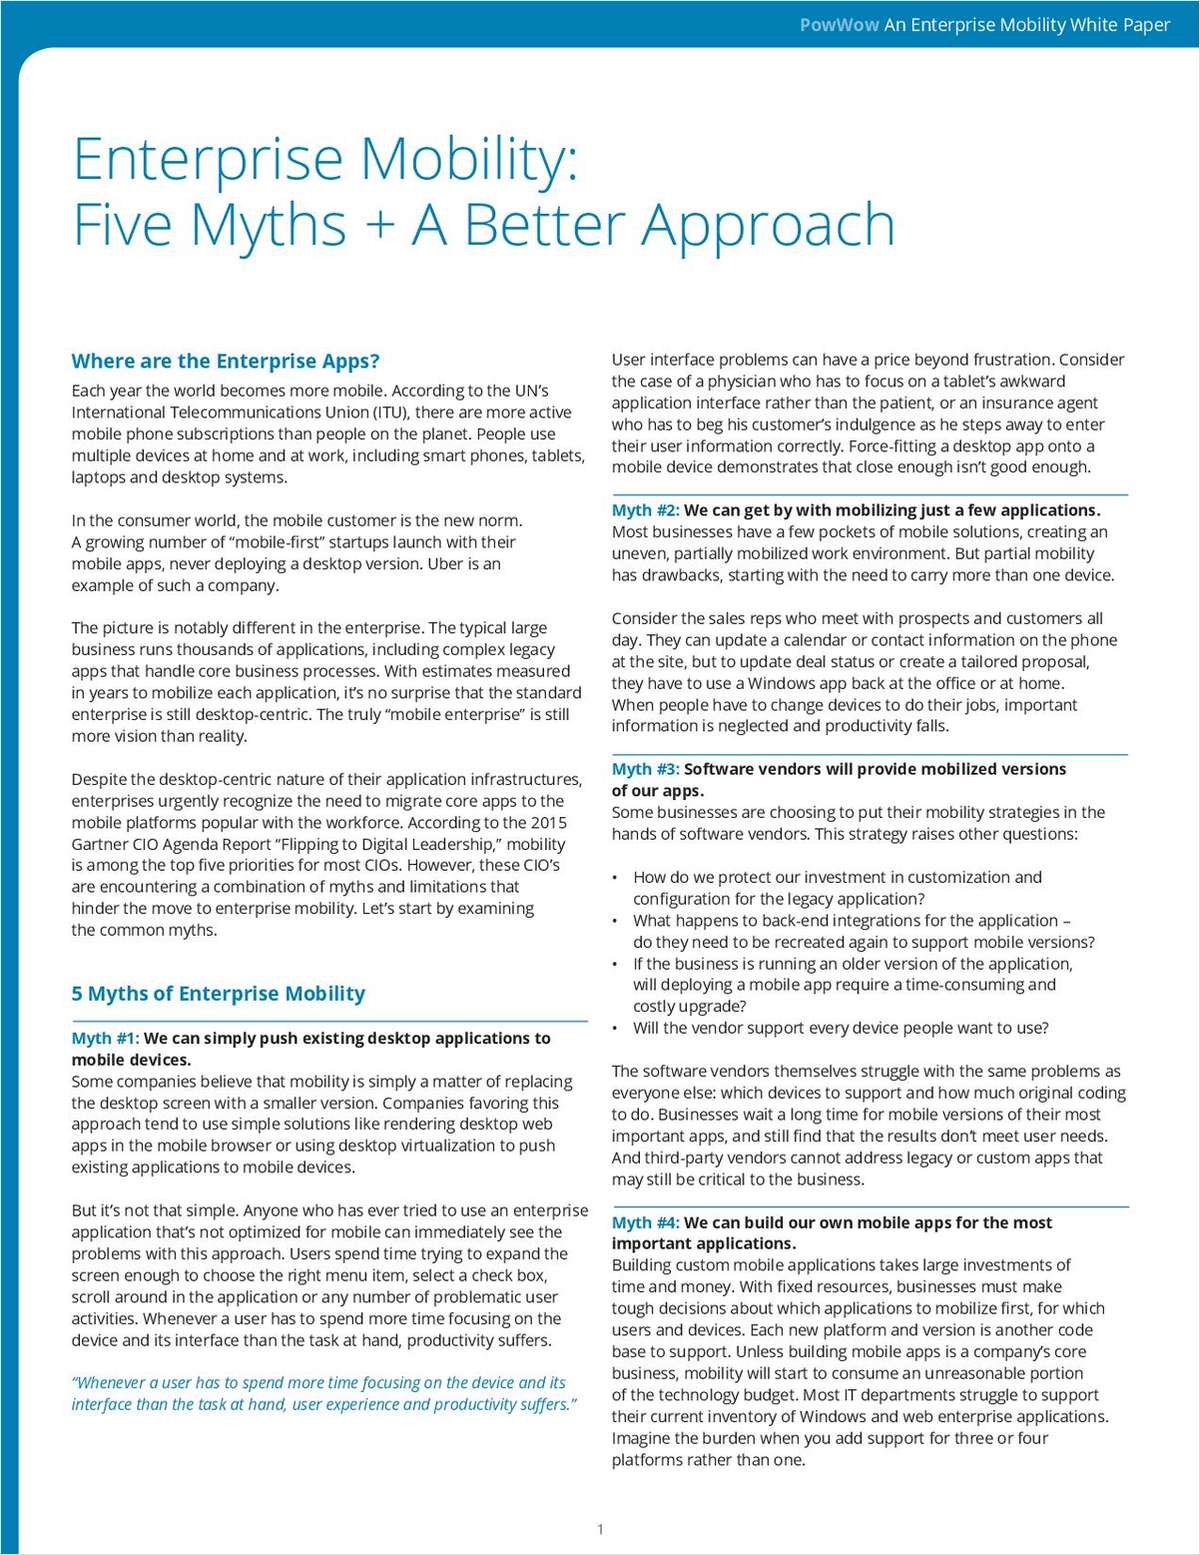 New Whitepaper: Enterprise Mobility, Five Myths + A Better Approach